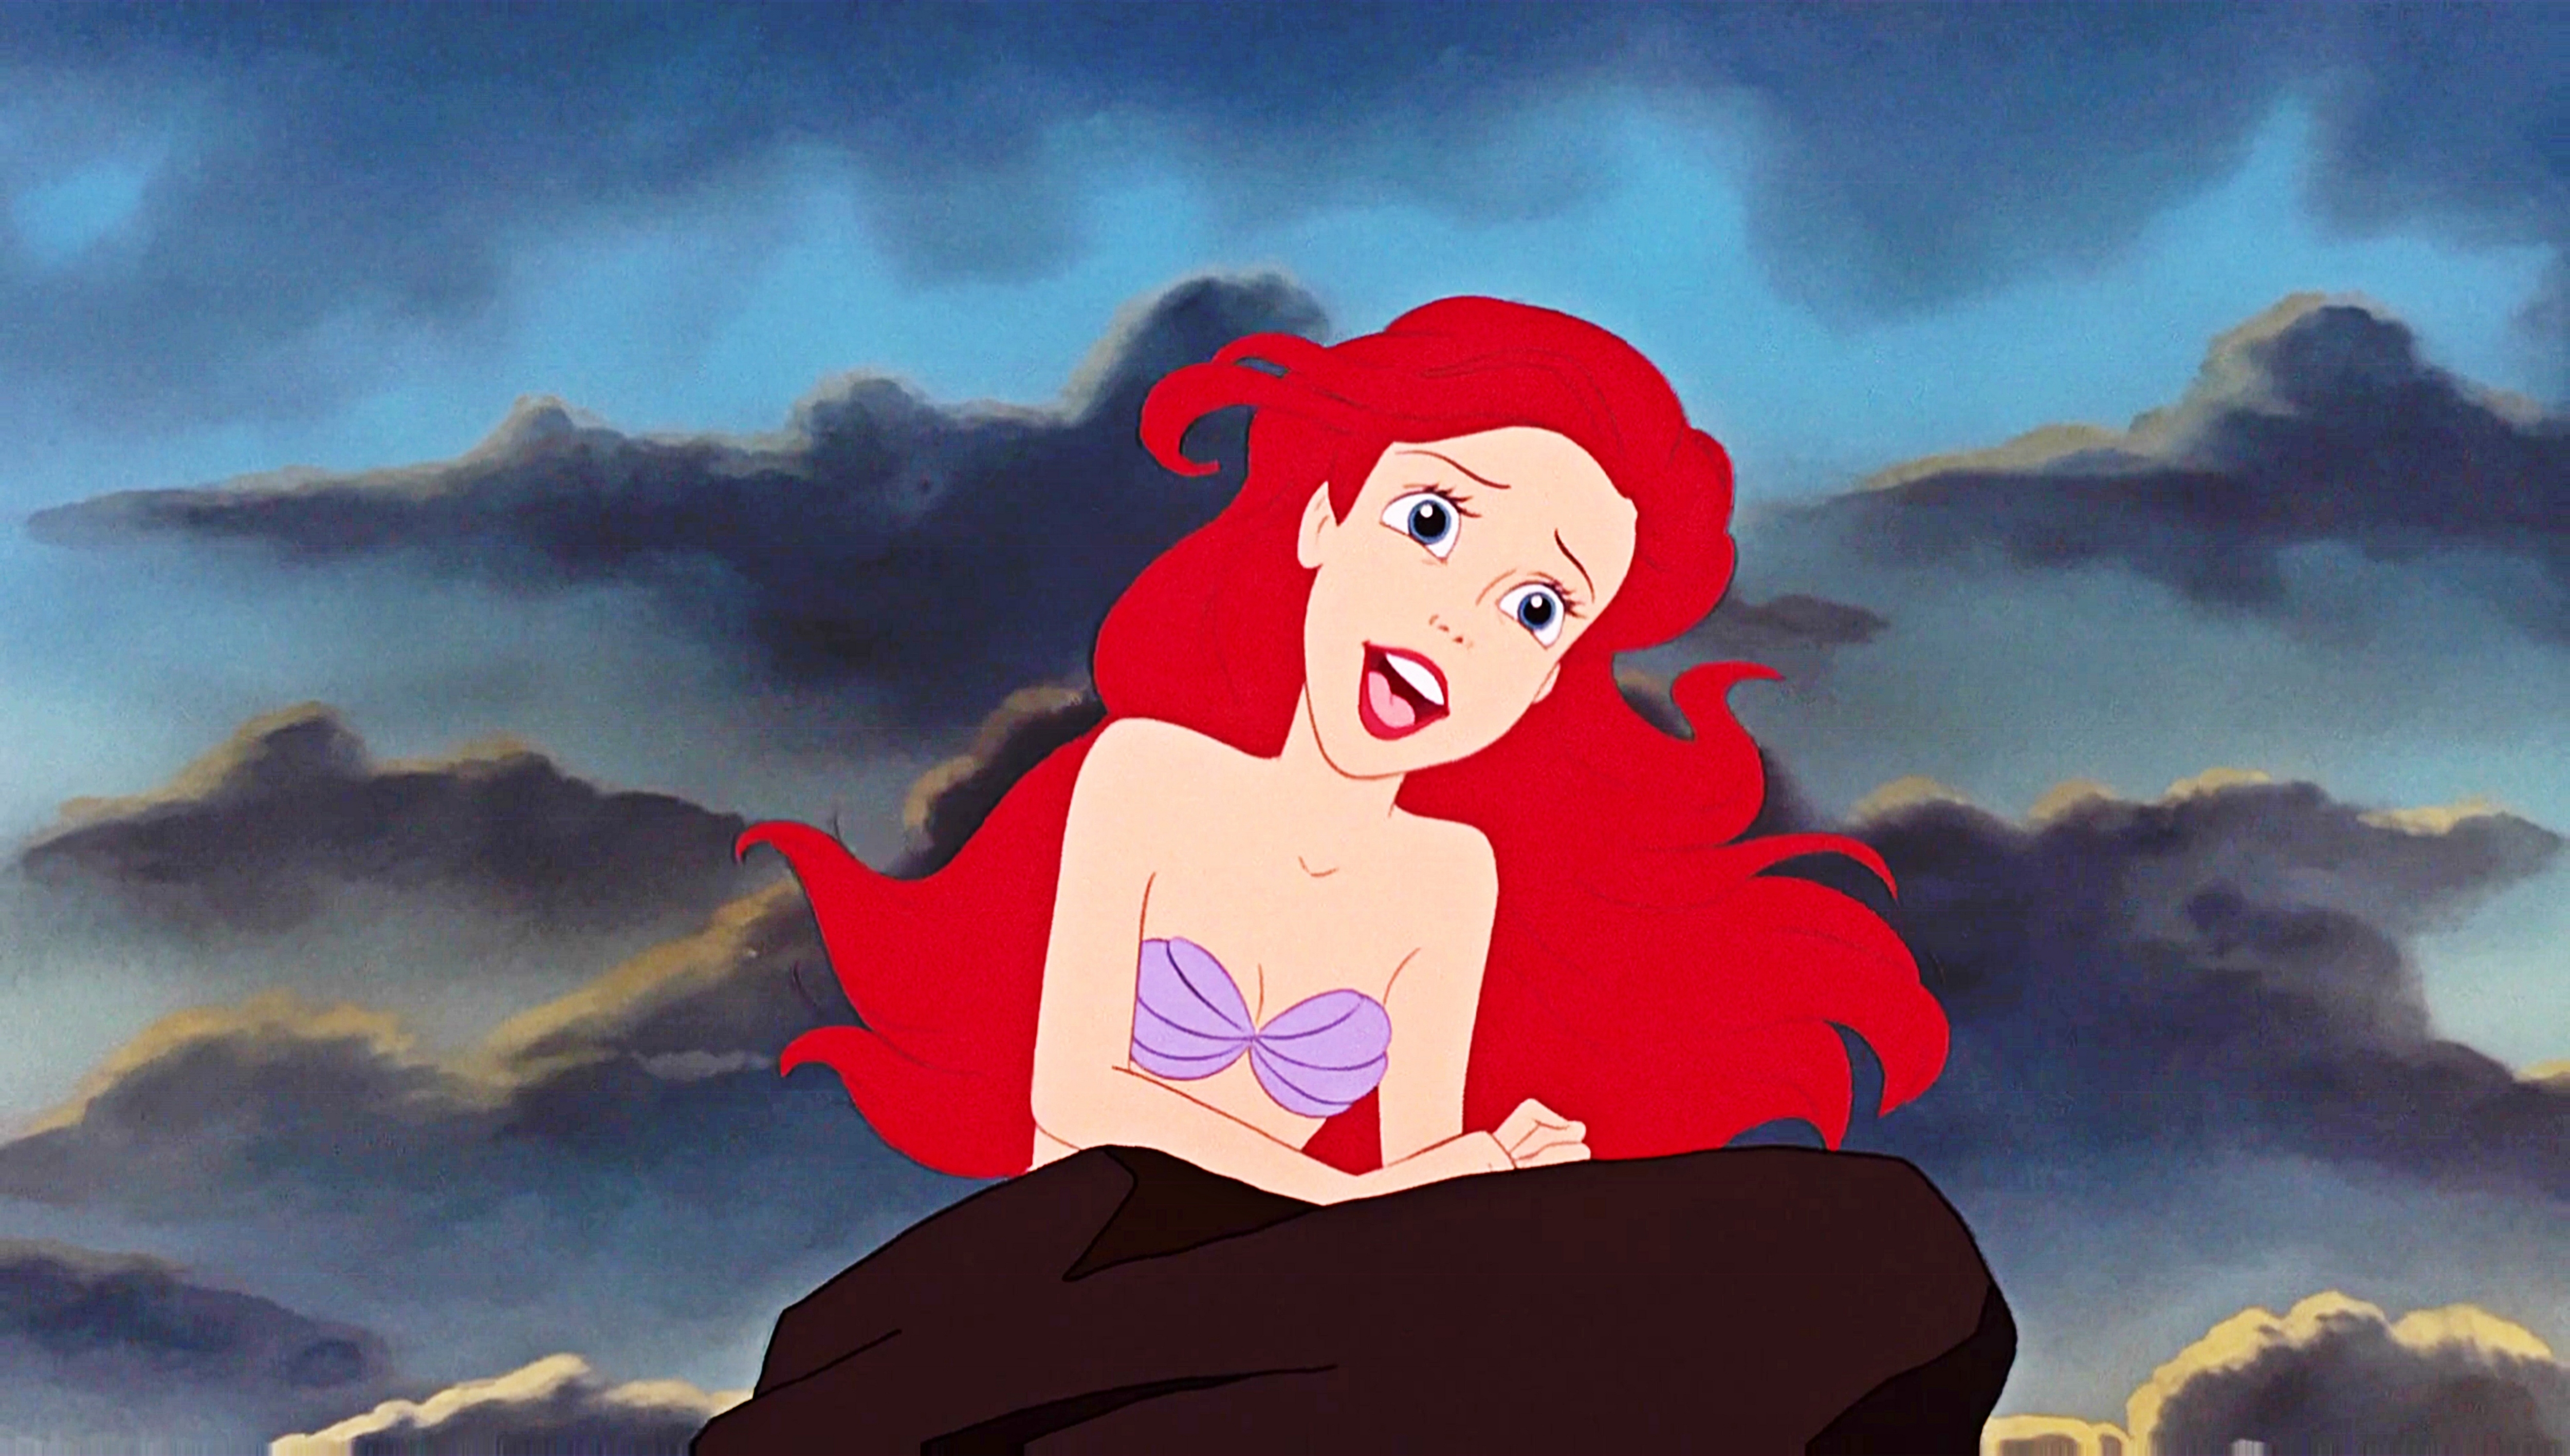 Could The Little Mermaid Get The Live Action Treatment?